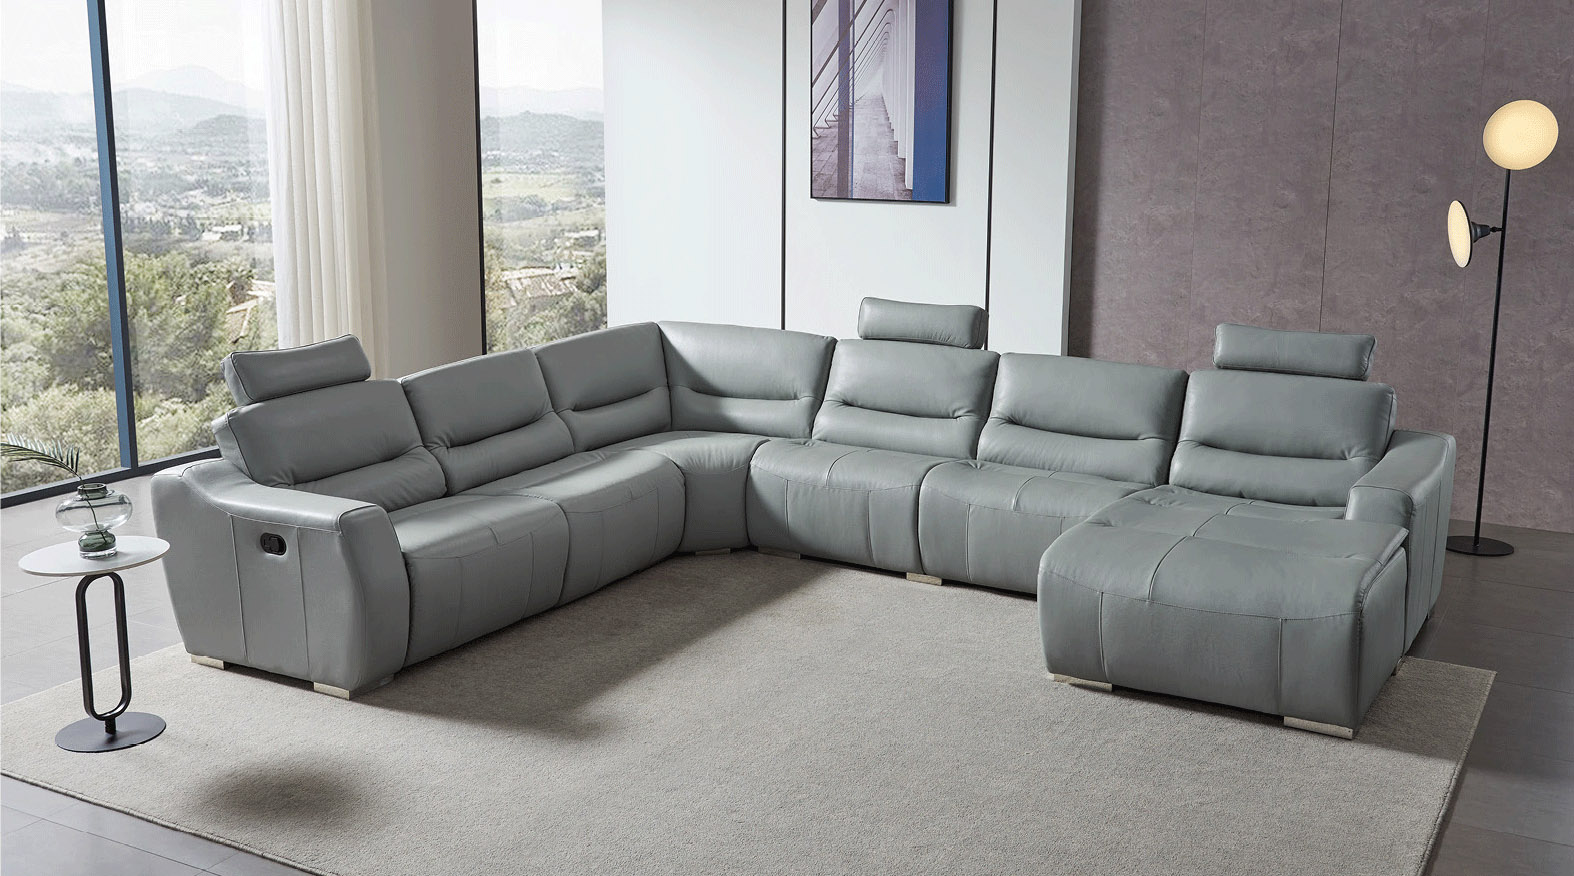 Grey Italian Leather Tufted Sectional, Leather Tufted Sectional